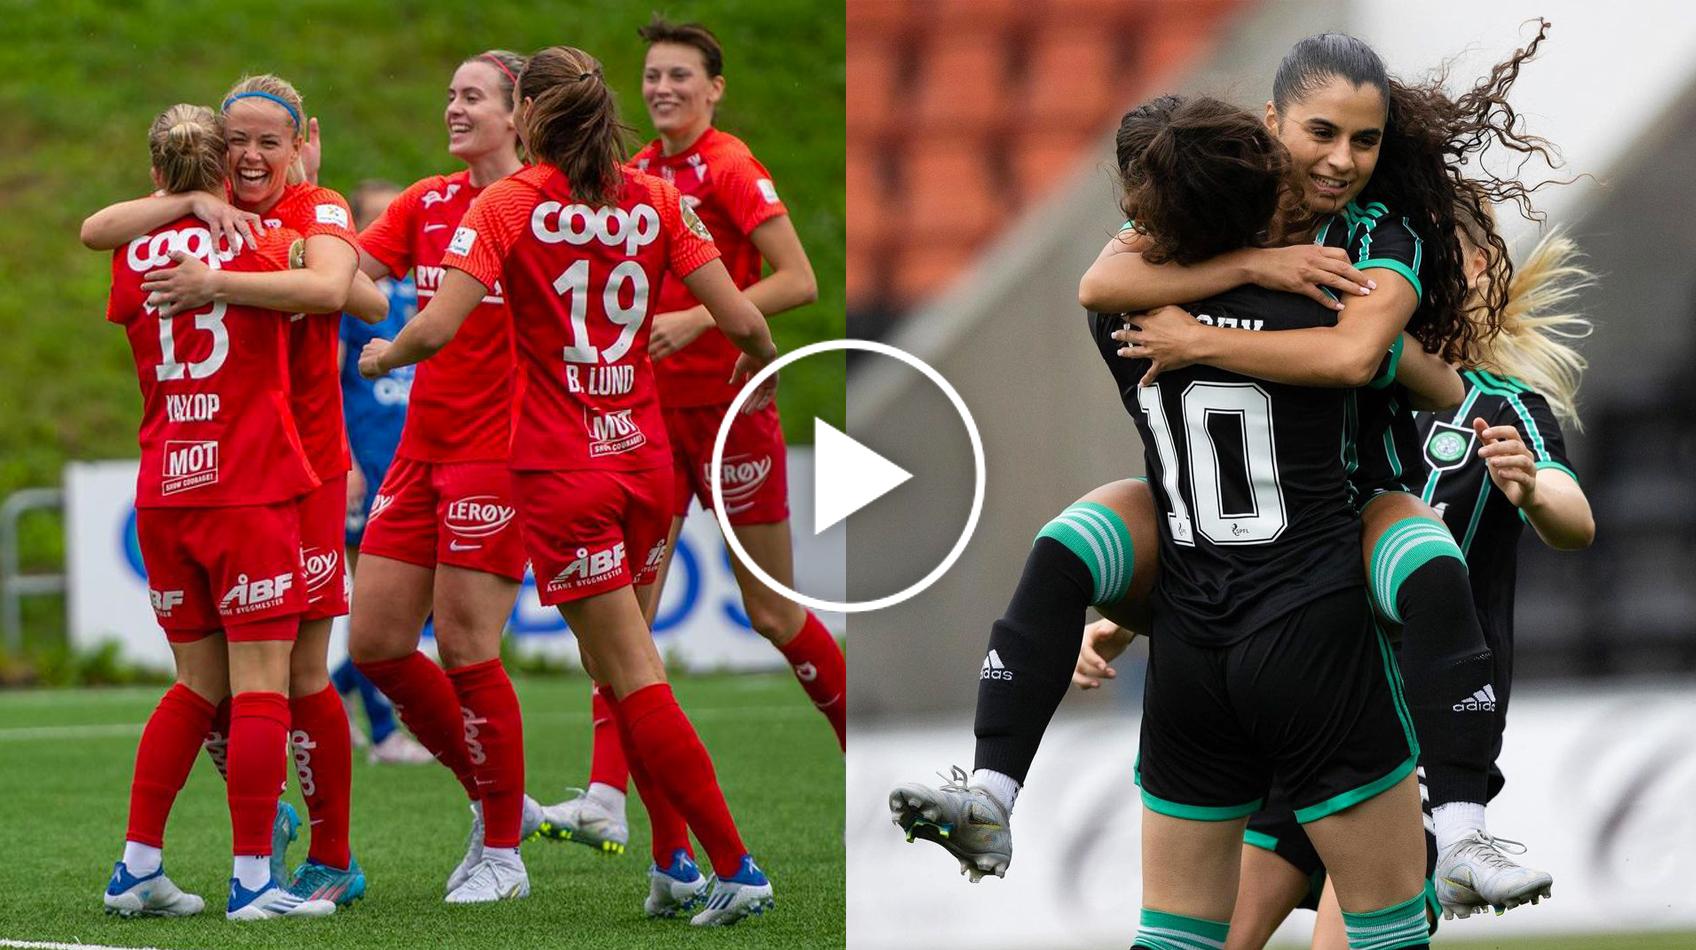 WATCH: Yallop scores first for SK Brann; Jacynta nets hat-trick for Celtic